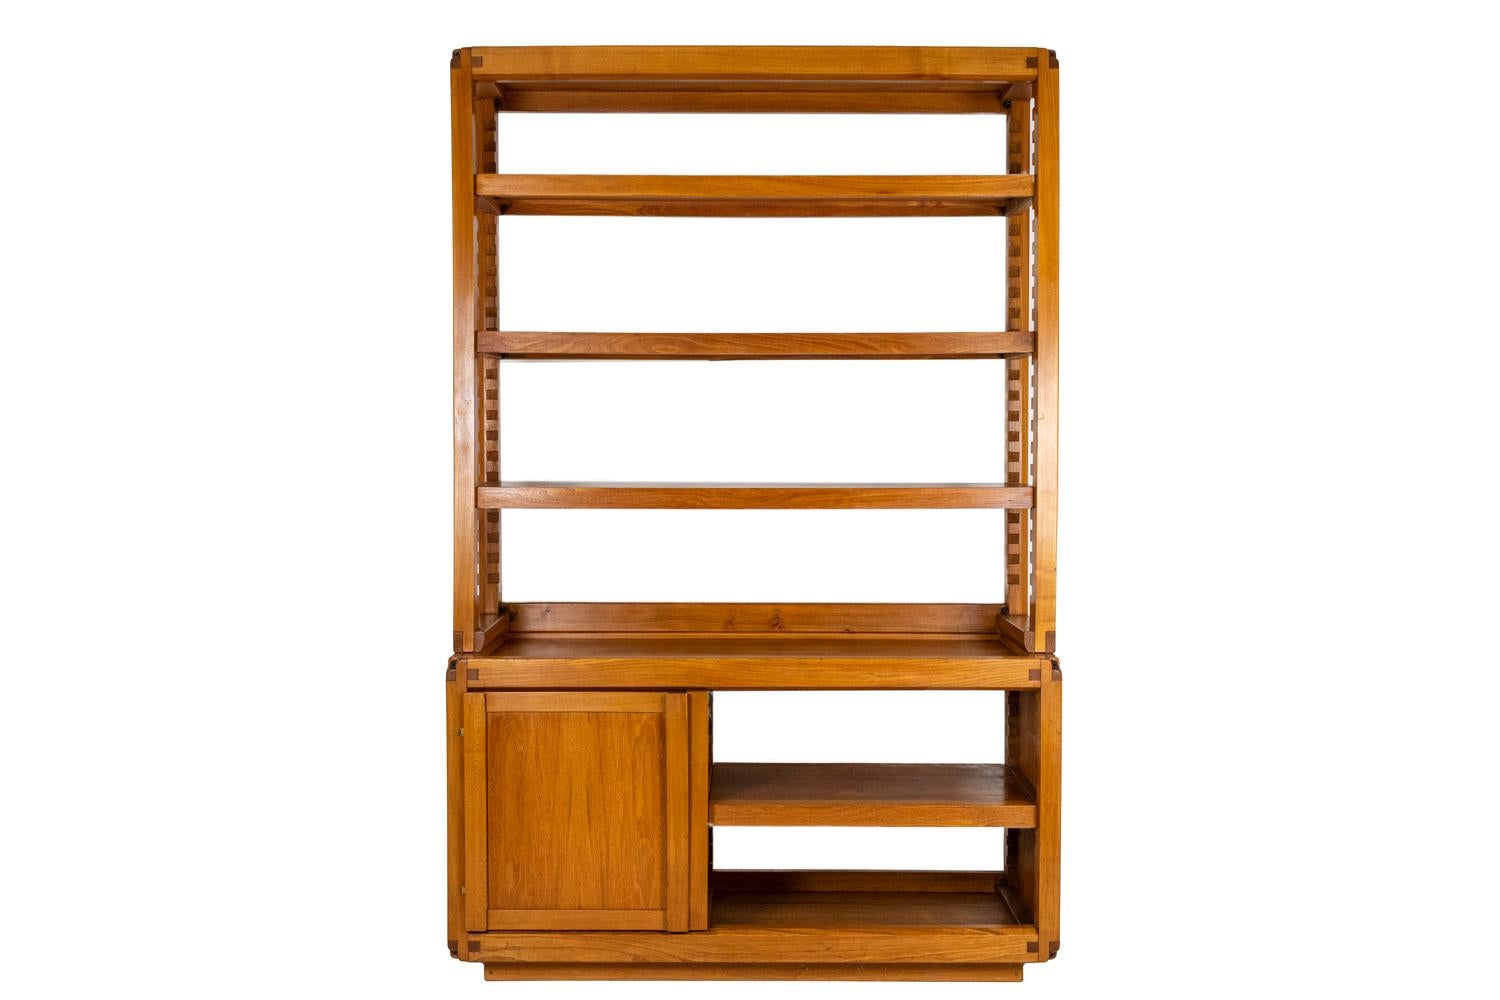 Pierre Chapo, by.

Shelving unit in blond natural elm, model B10, consisting of three front shelves. A door in the lower part.

French work realized in the 1960s.